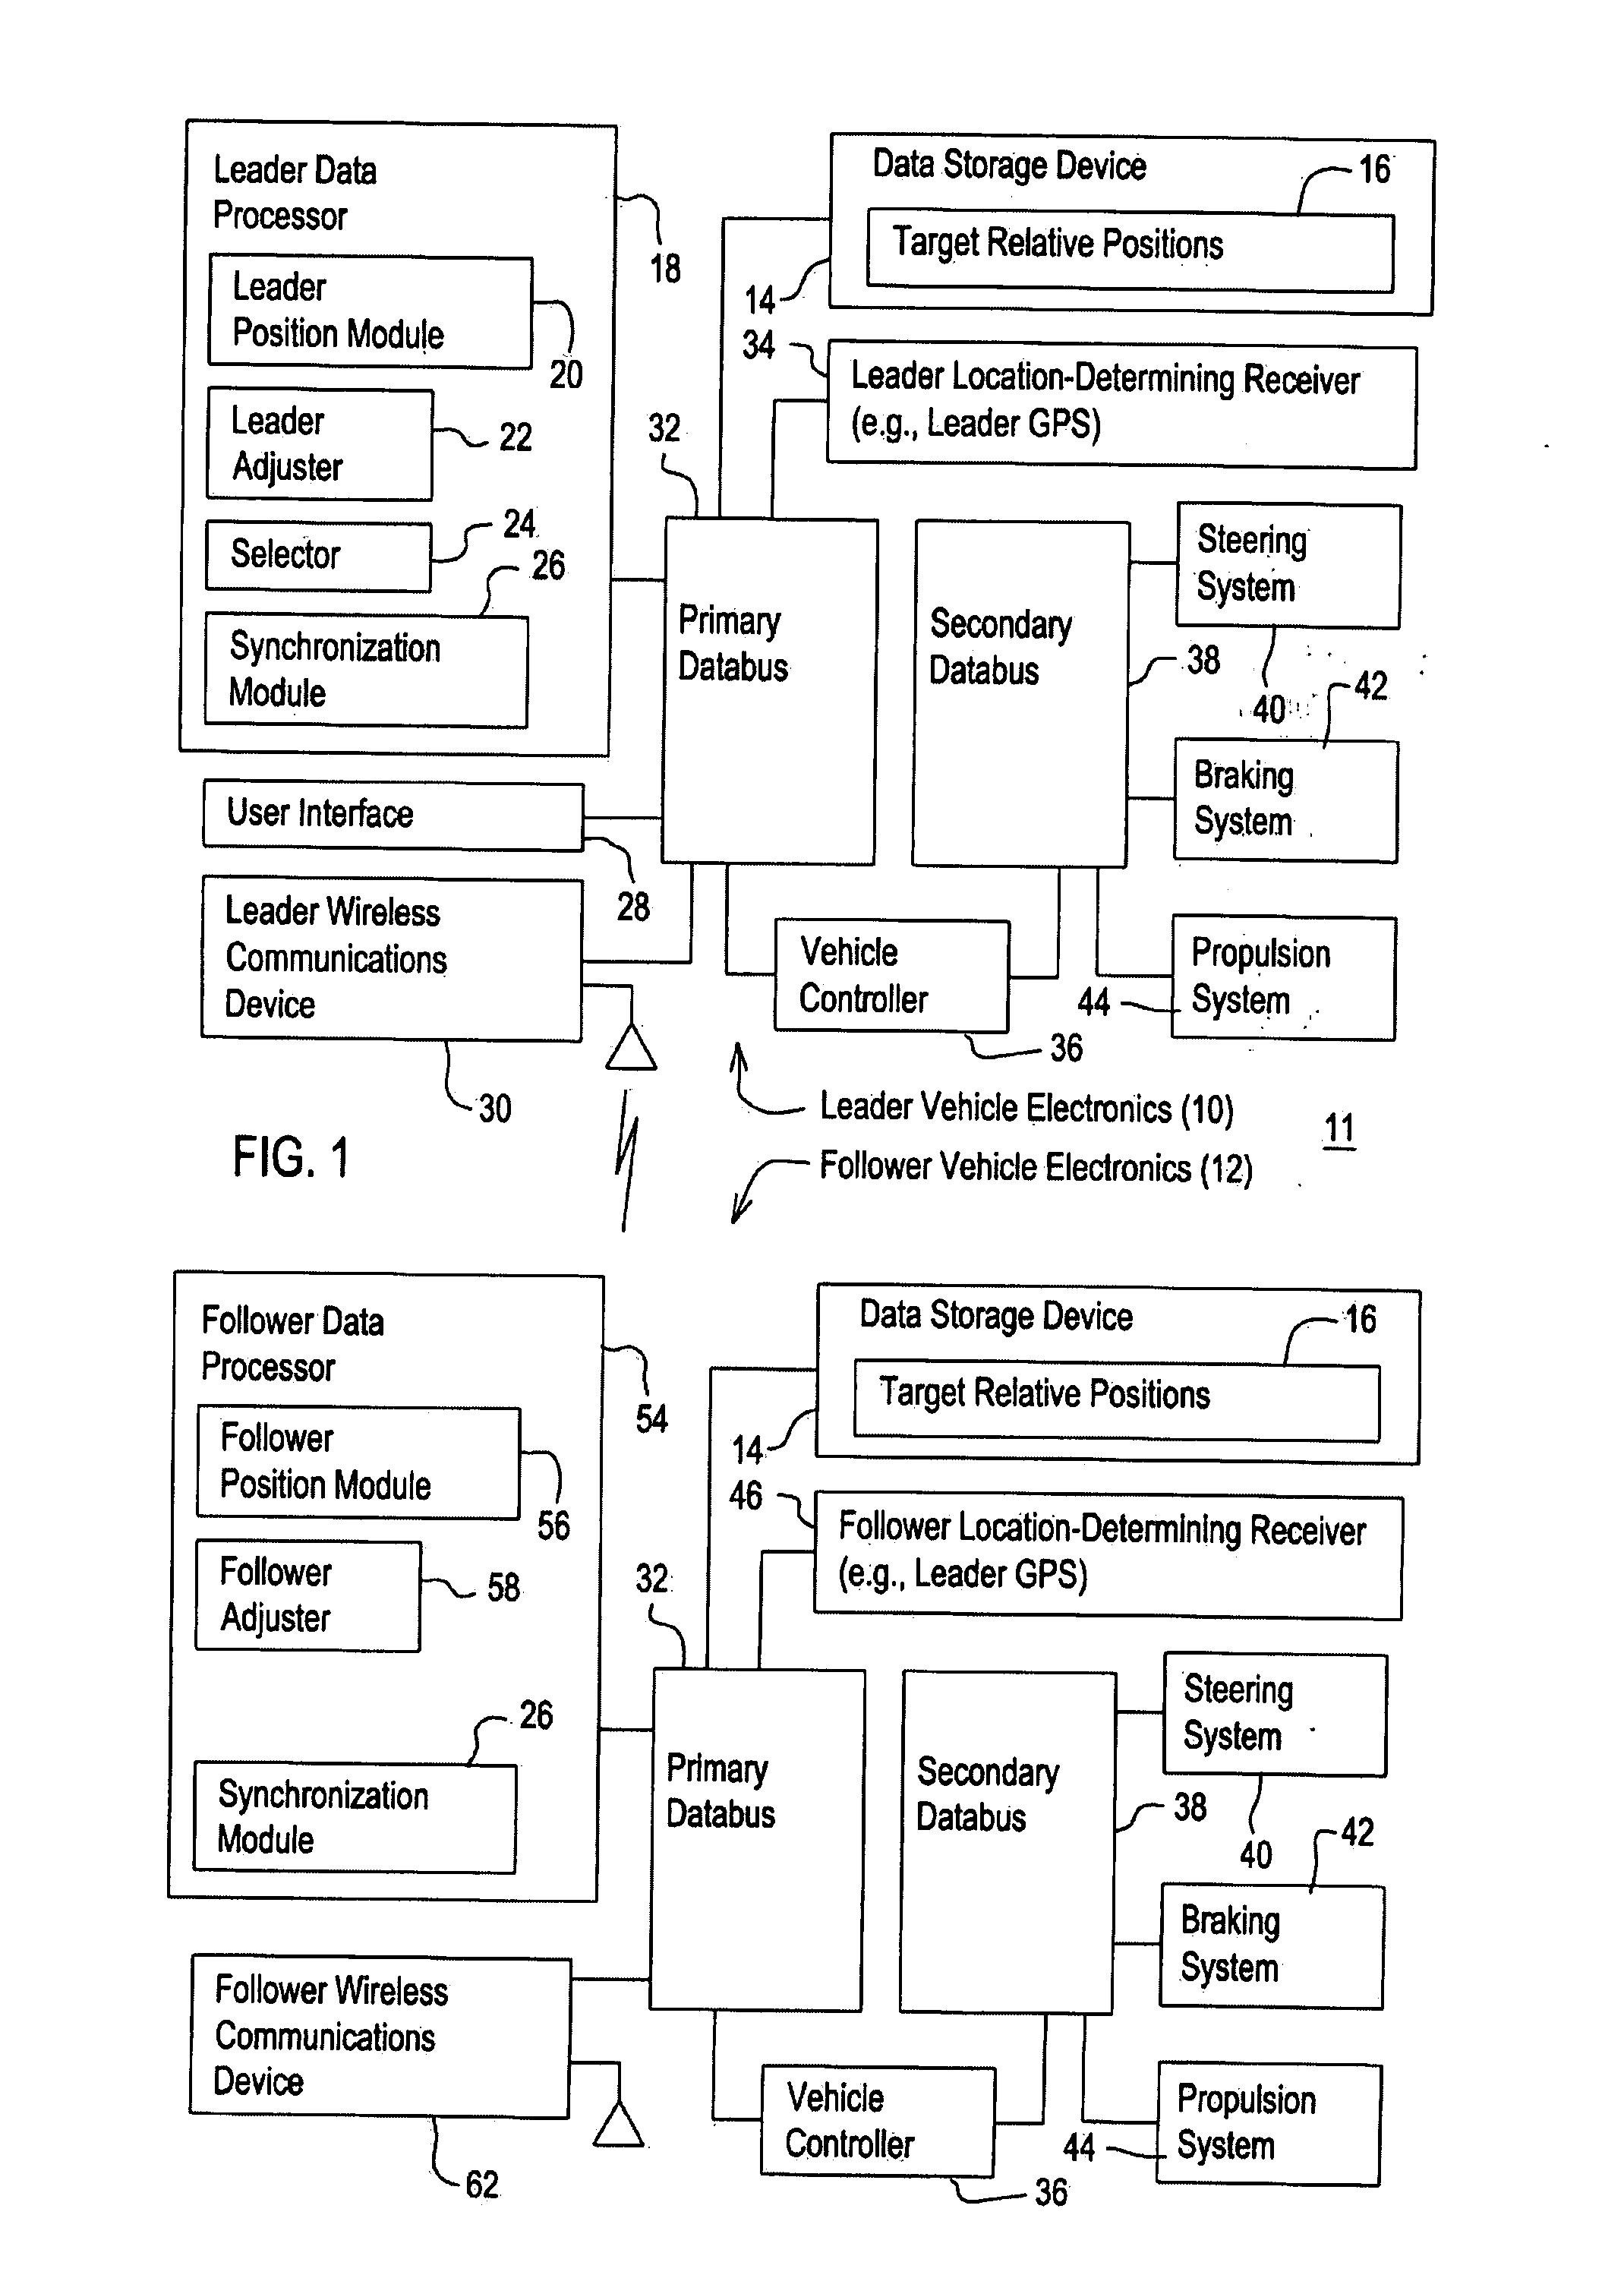 Method And System For Controlling The Loading Of A Container Associated With A Vehicle